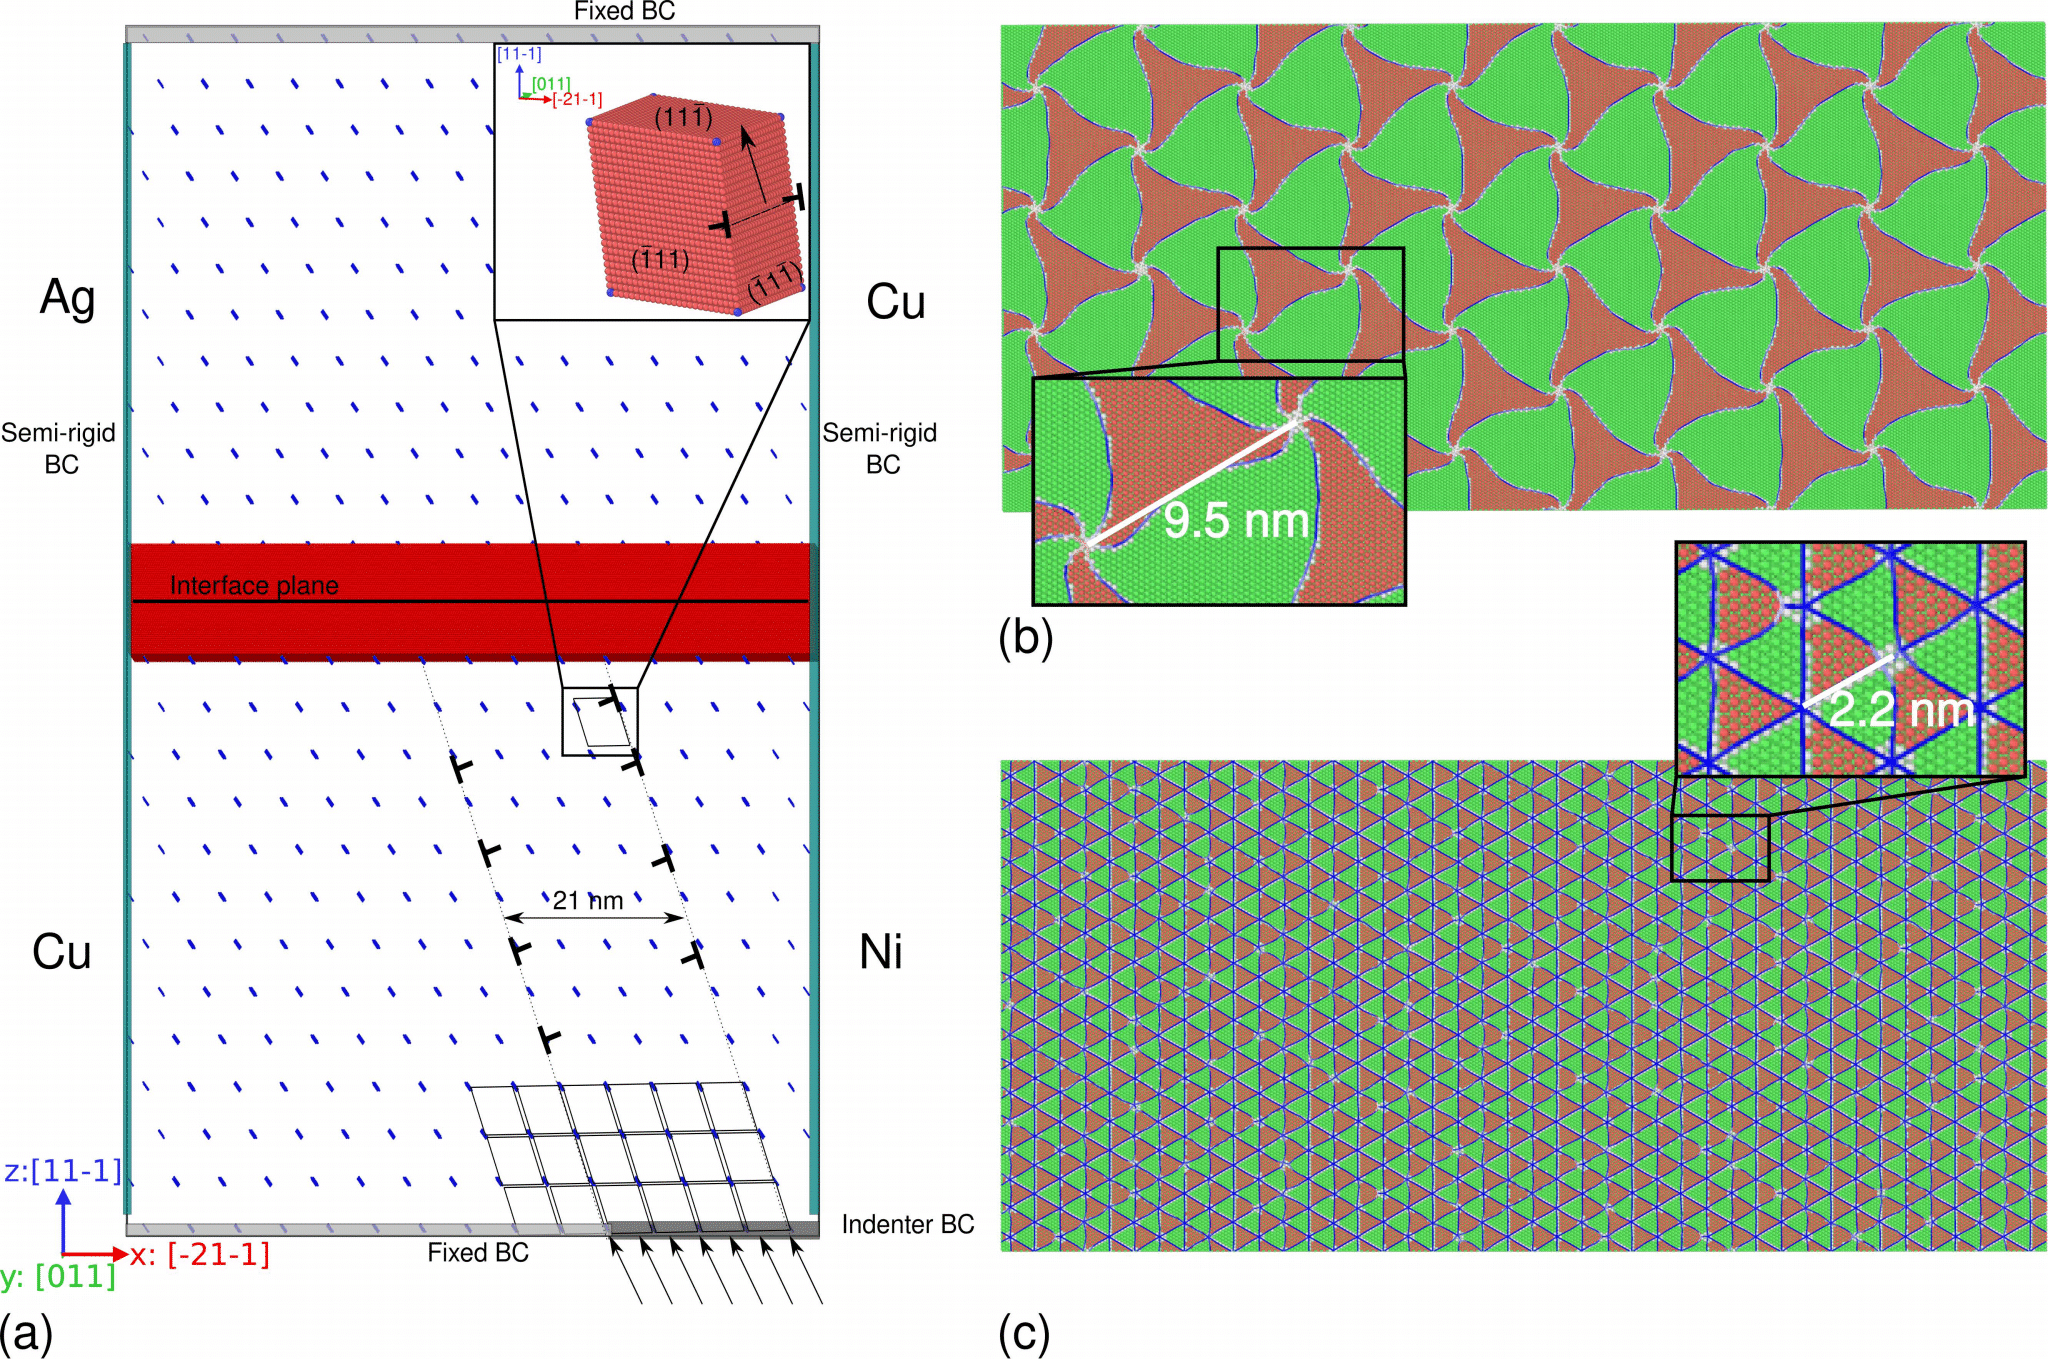 Figure 8: a) Atom (red) and finite element node(blue) representation of model with overlaid schematics of boundary conditions and CAC finite element shapes. b) Common neighbor analysis of relaxed Ni/Cu interface and c) common neighbor analysis of relaxed Cu/Ag interface. Green atoms are FCC, red atoms are HCP, blue atoms are BCC, and gray atoms are others. Insets represent zoomed in sections of interfaces capturing misfit nodes. Misfit node spacings of 9.5 nm and 2.2 nm agree with values from the literature